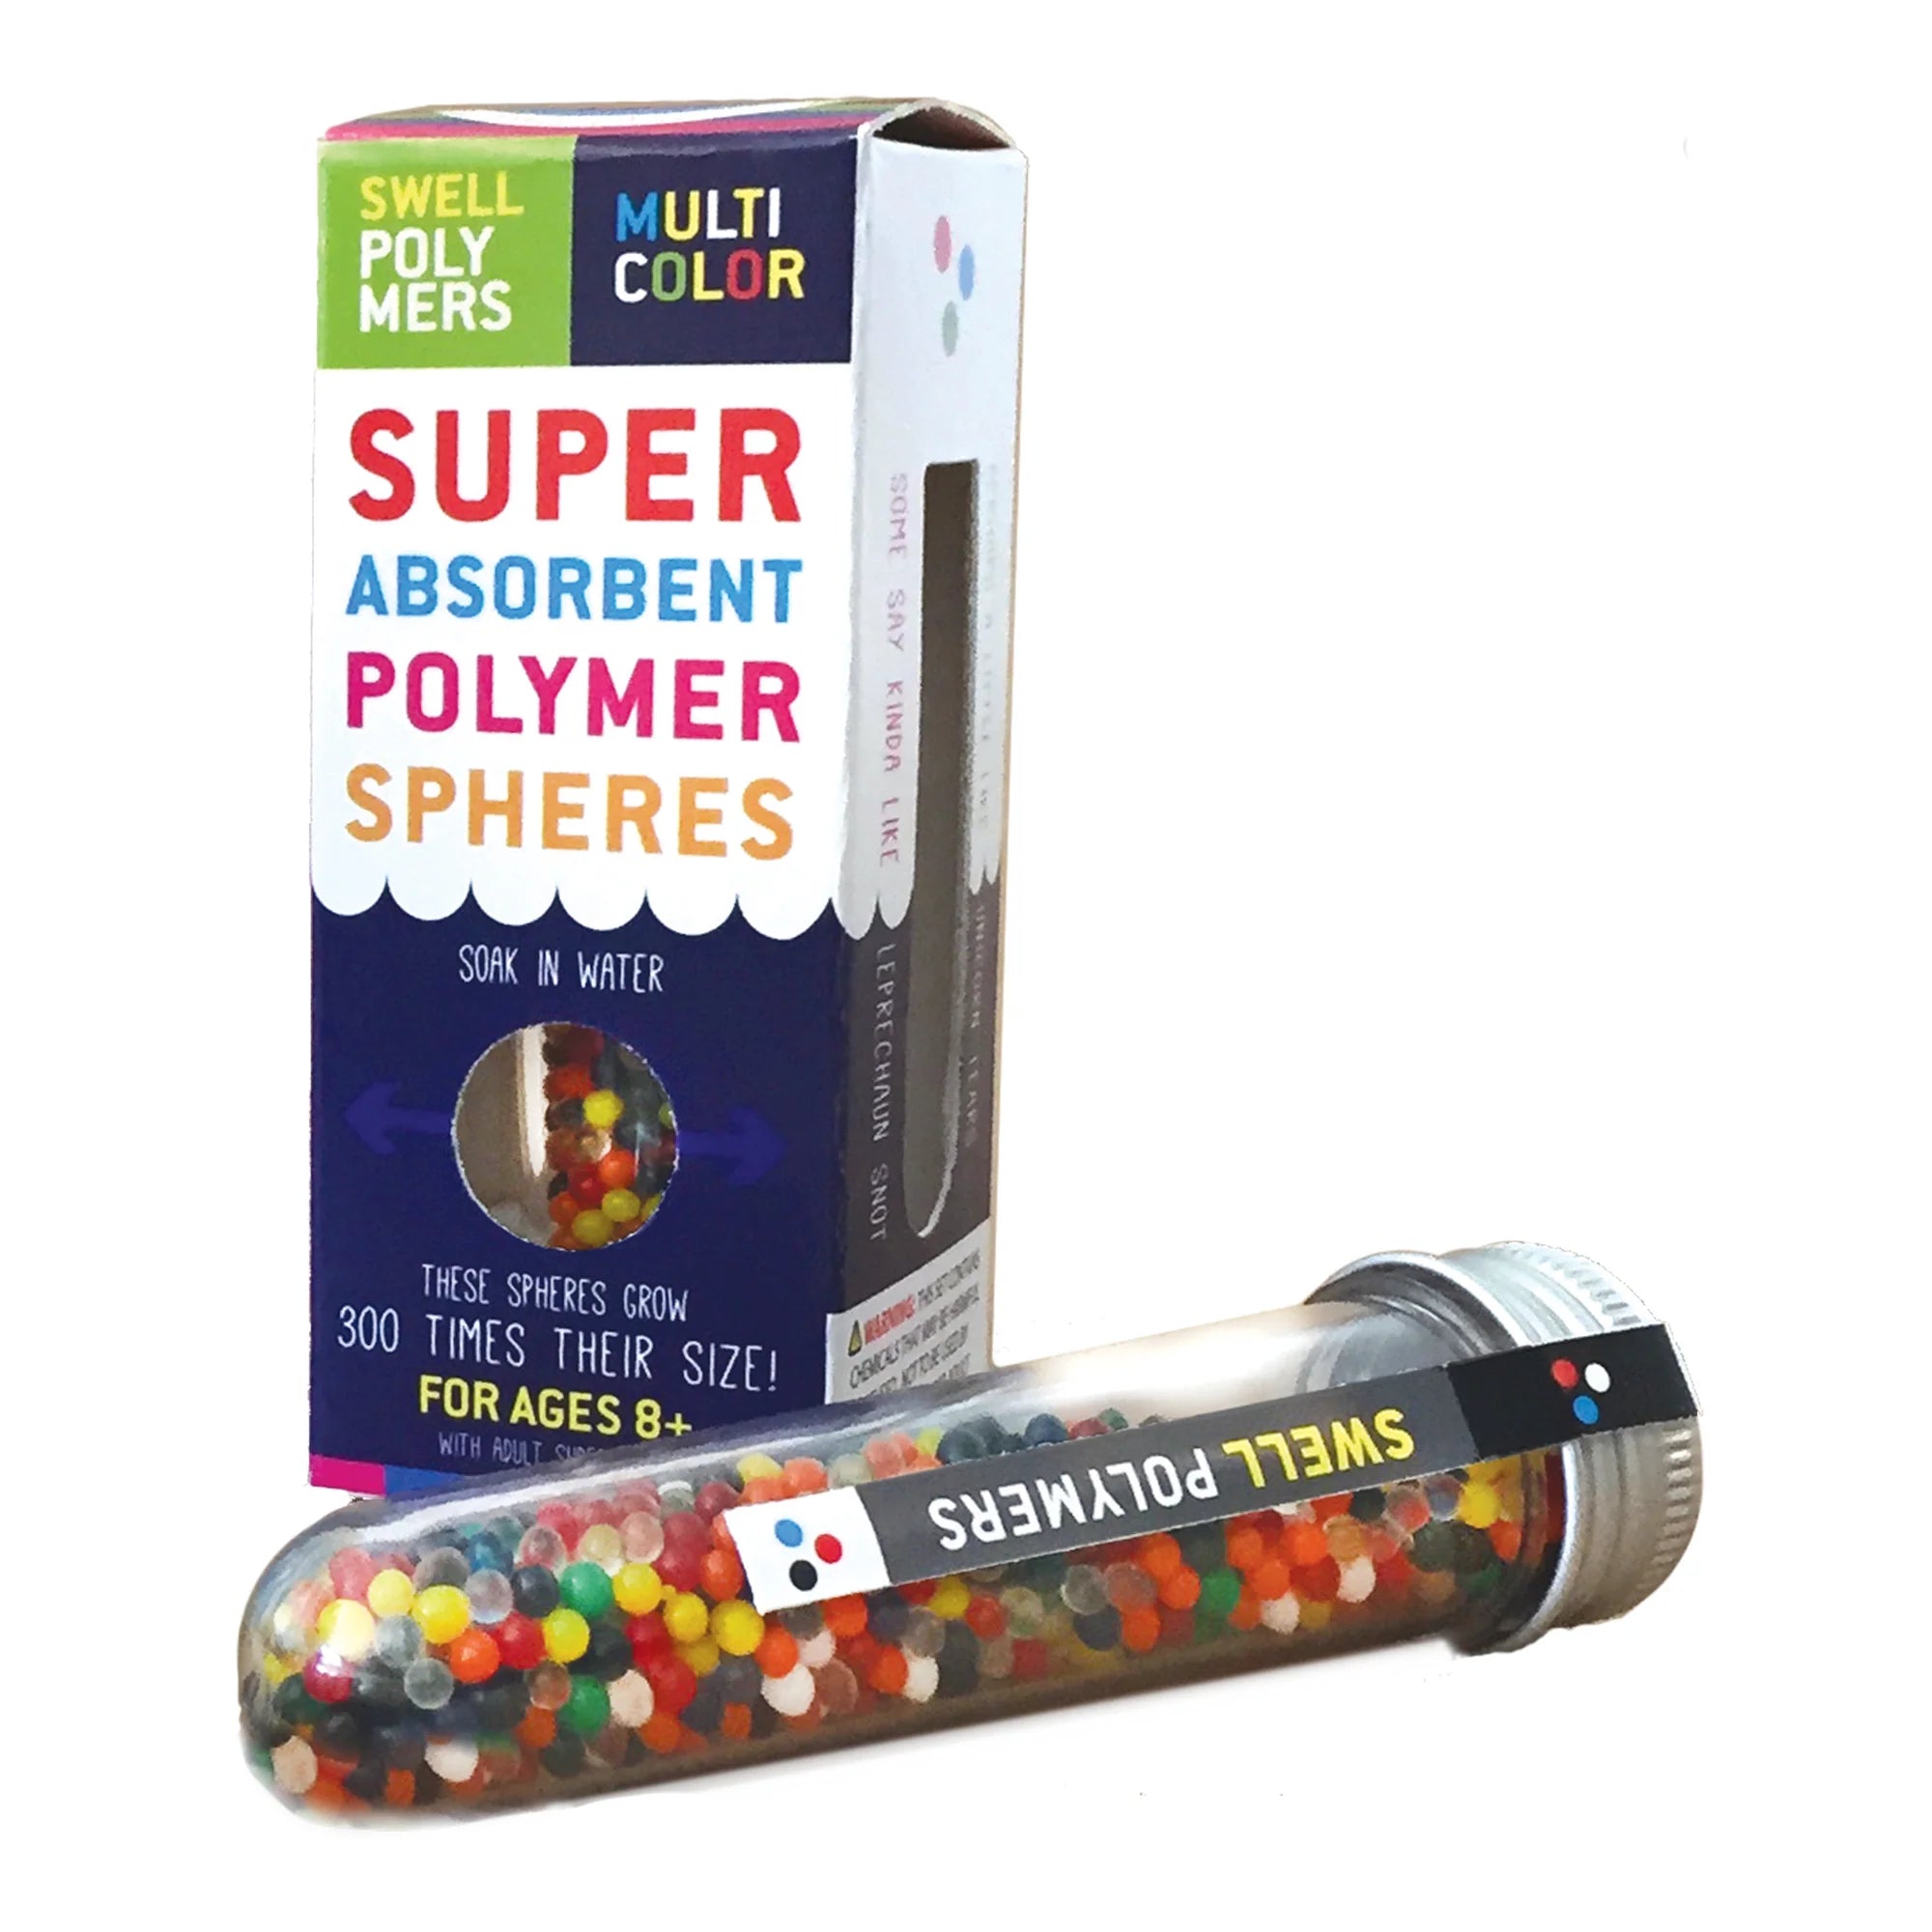 Swell Polymer Spheres - Multicolor